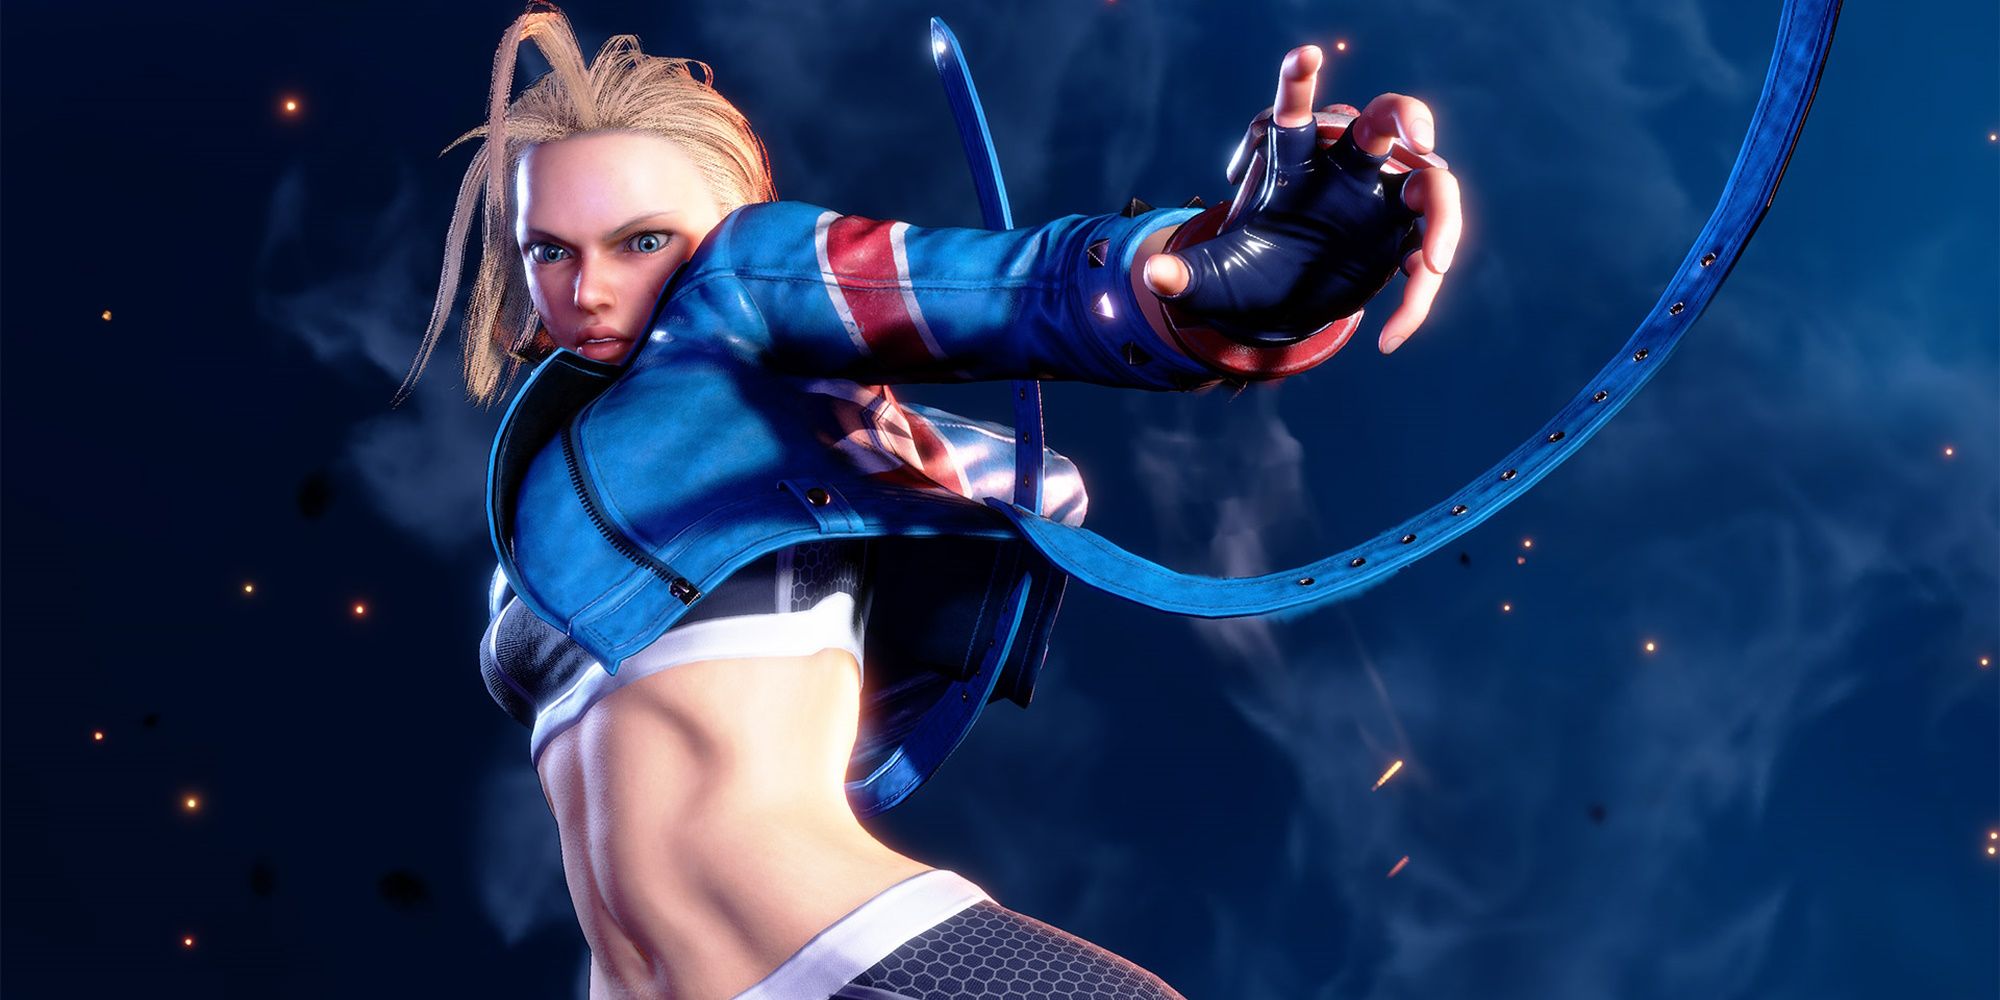 Street Fighter 6 reveals three new characters